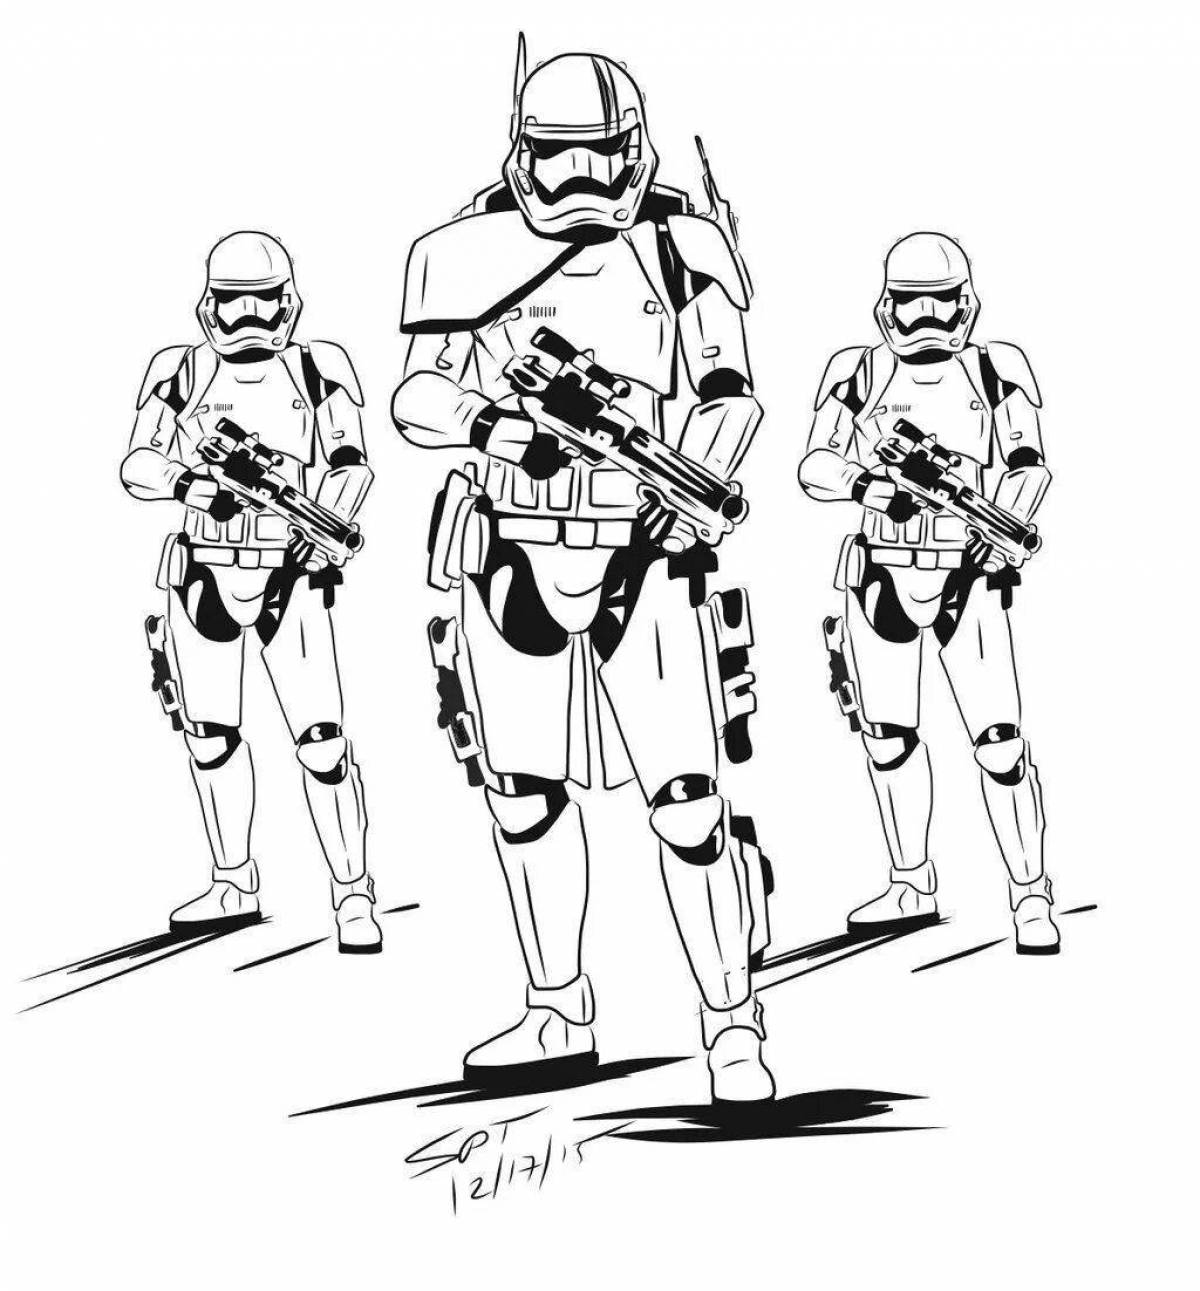 Artistic Stormtrooper coloring page